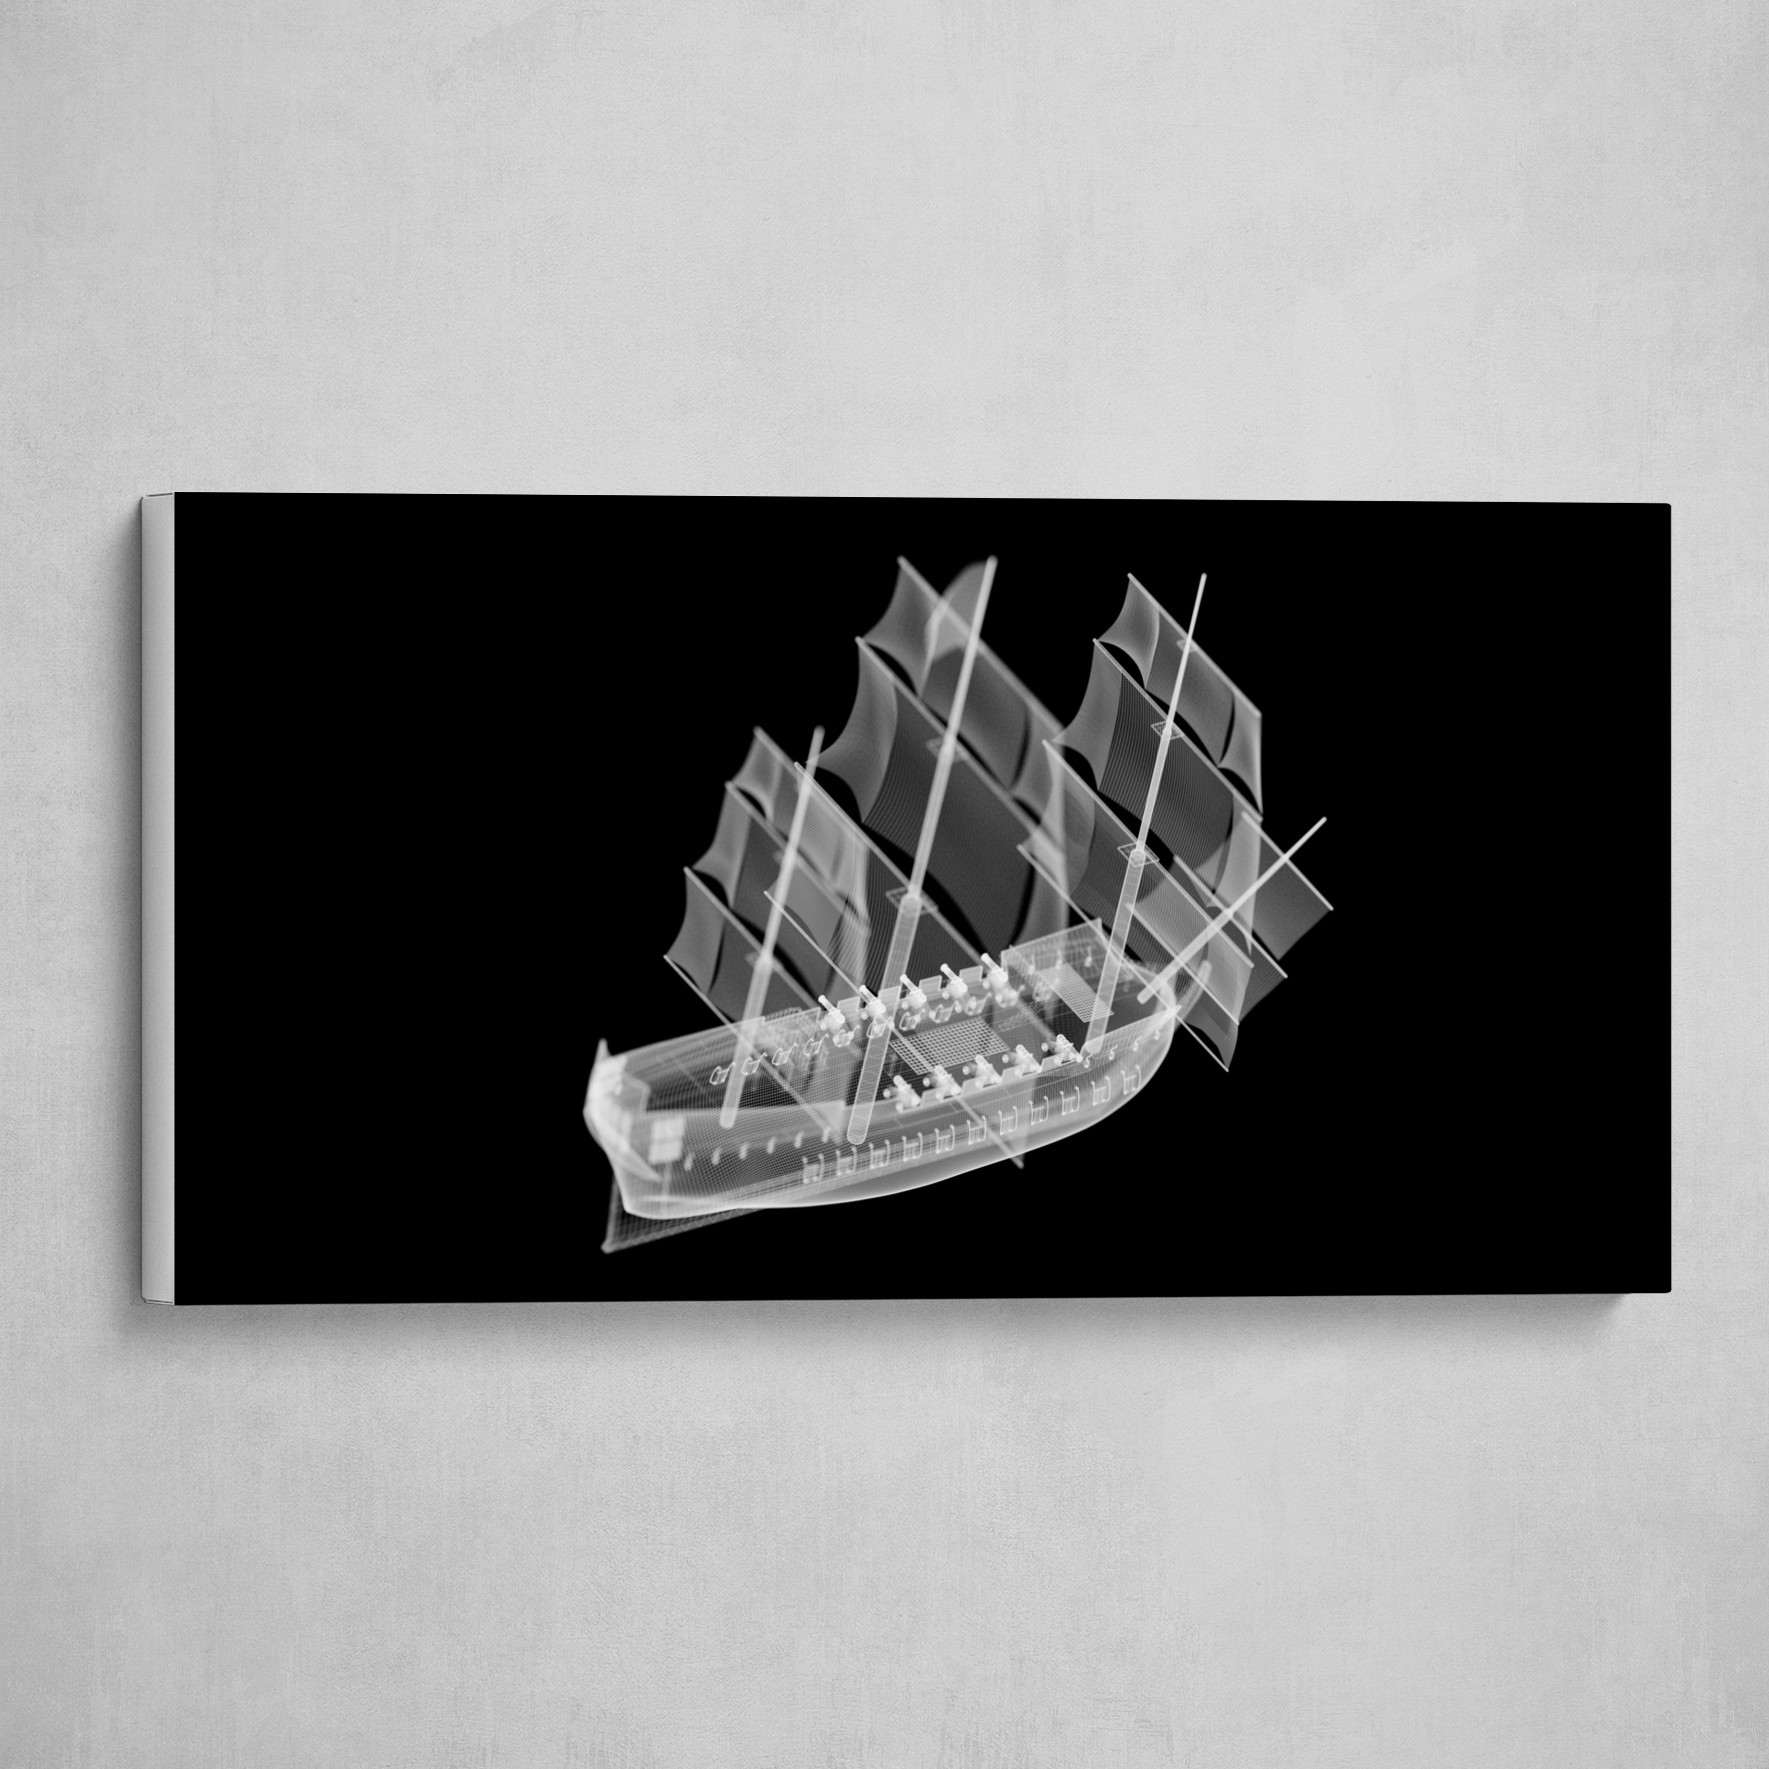 Wireframe Boat